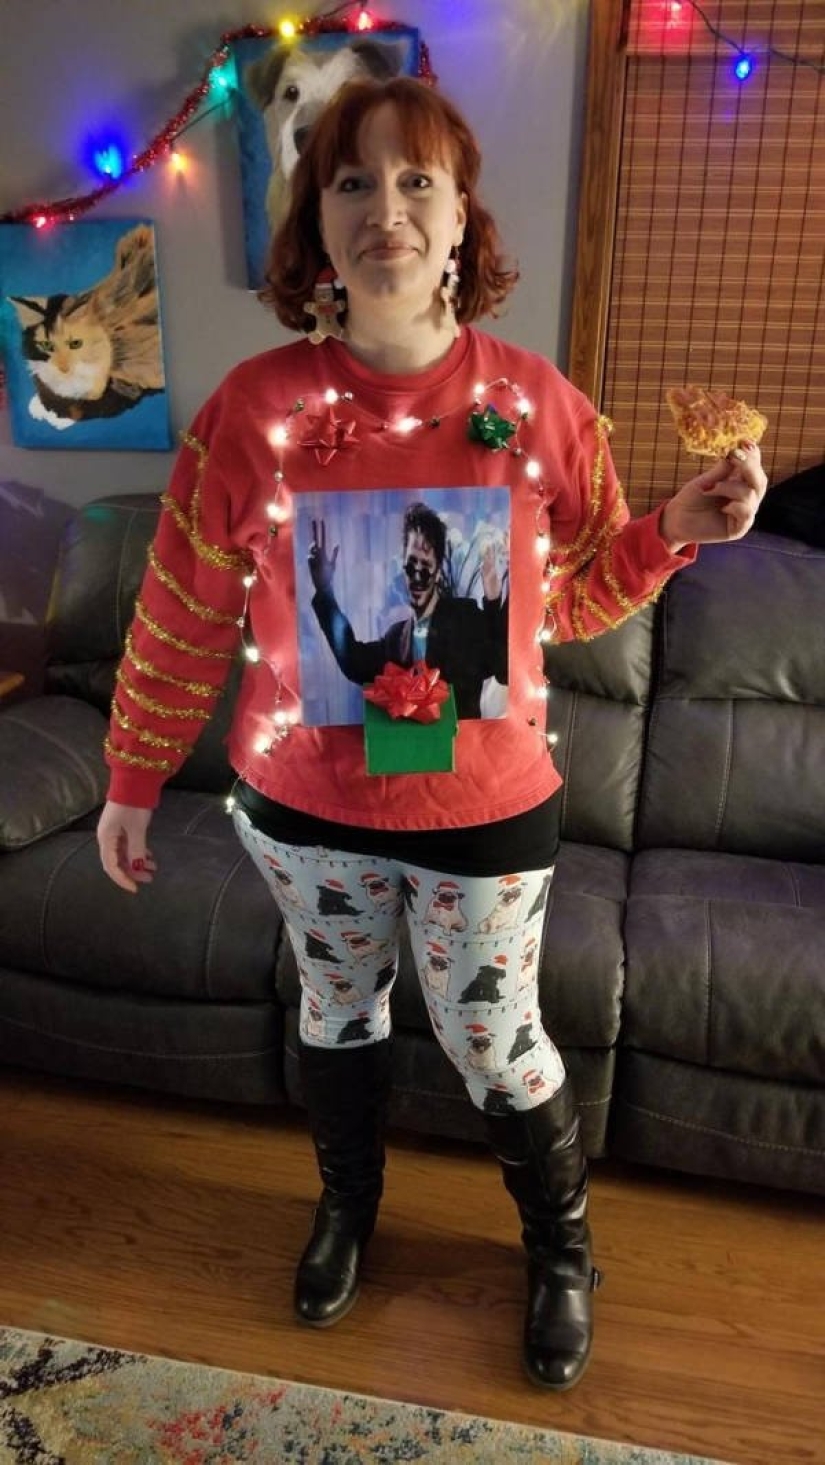 24 ridiculous sweaters that mock Christmas